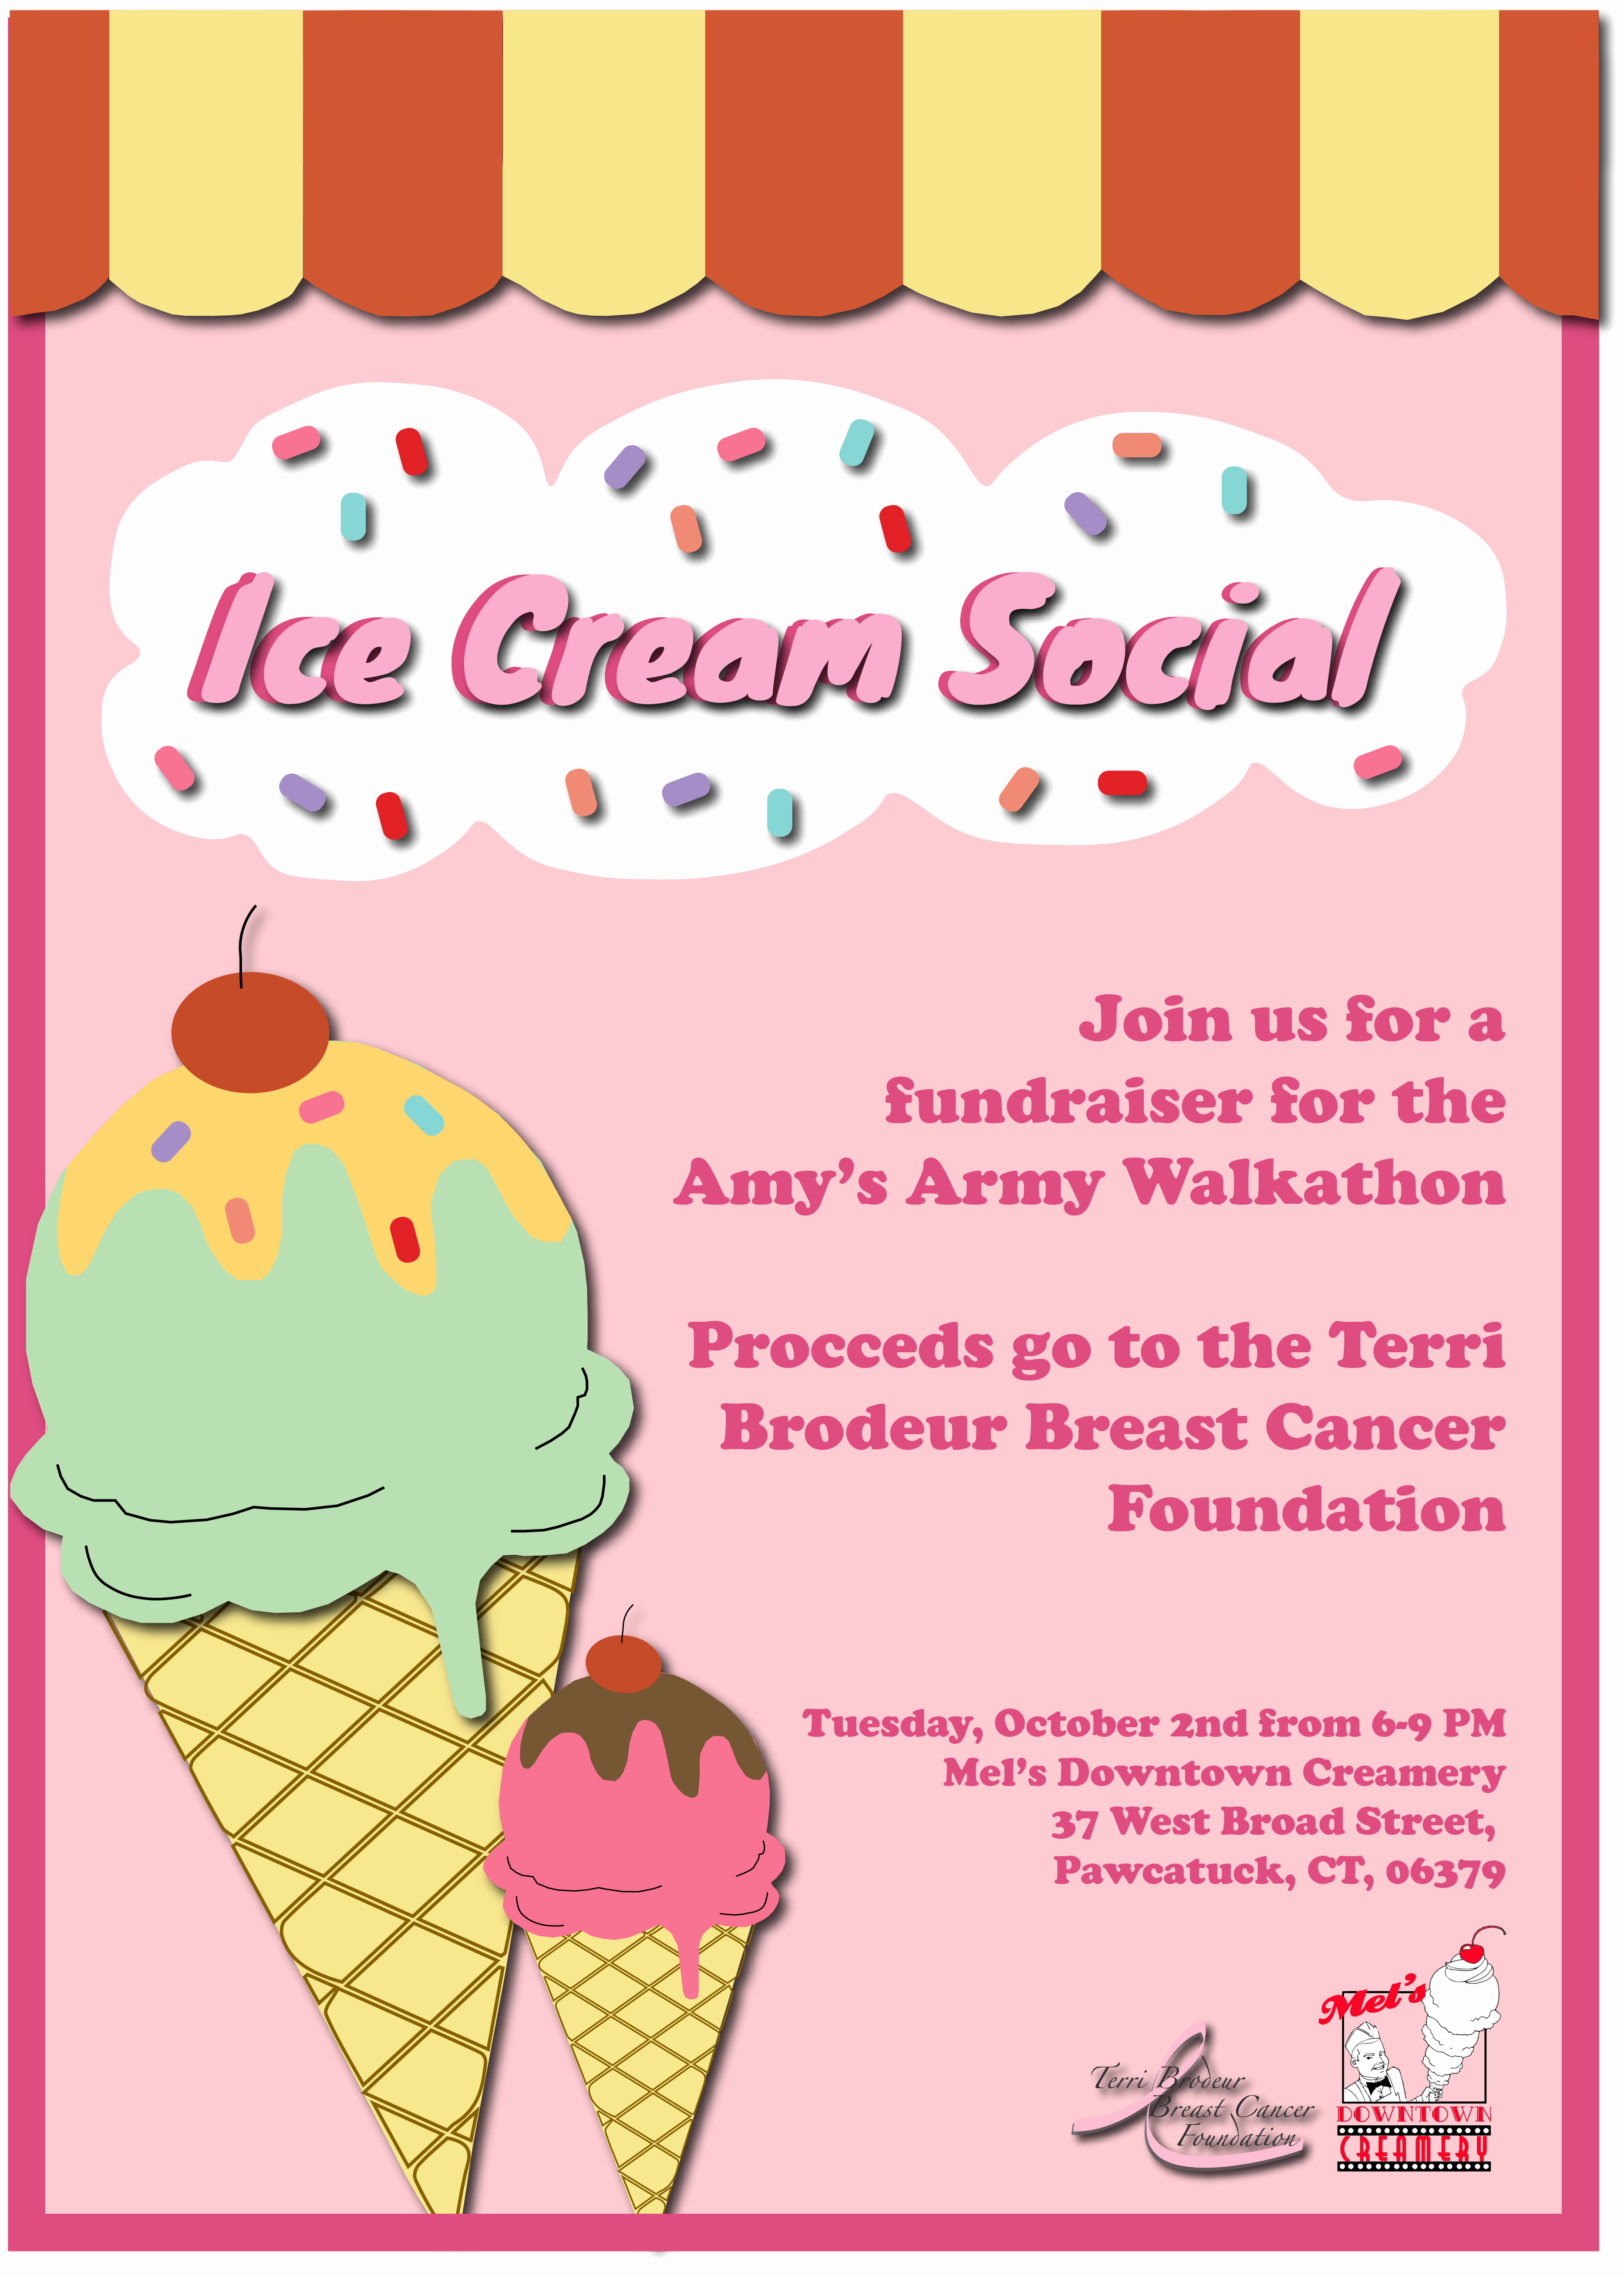 Ice Cream social Flyer Awesome Ice Cream social Flyer Terri Brodeur Breast Cancer